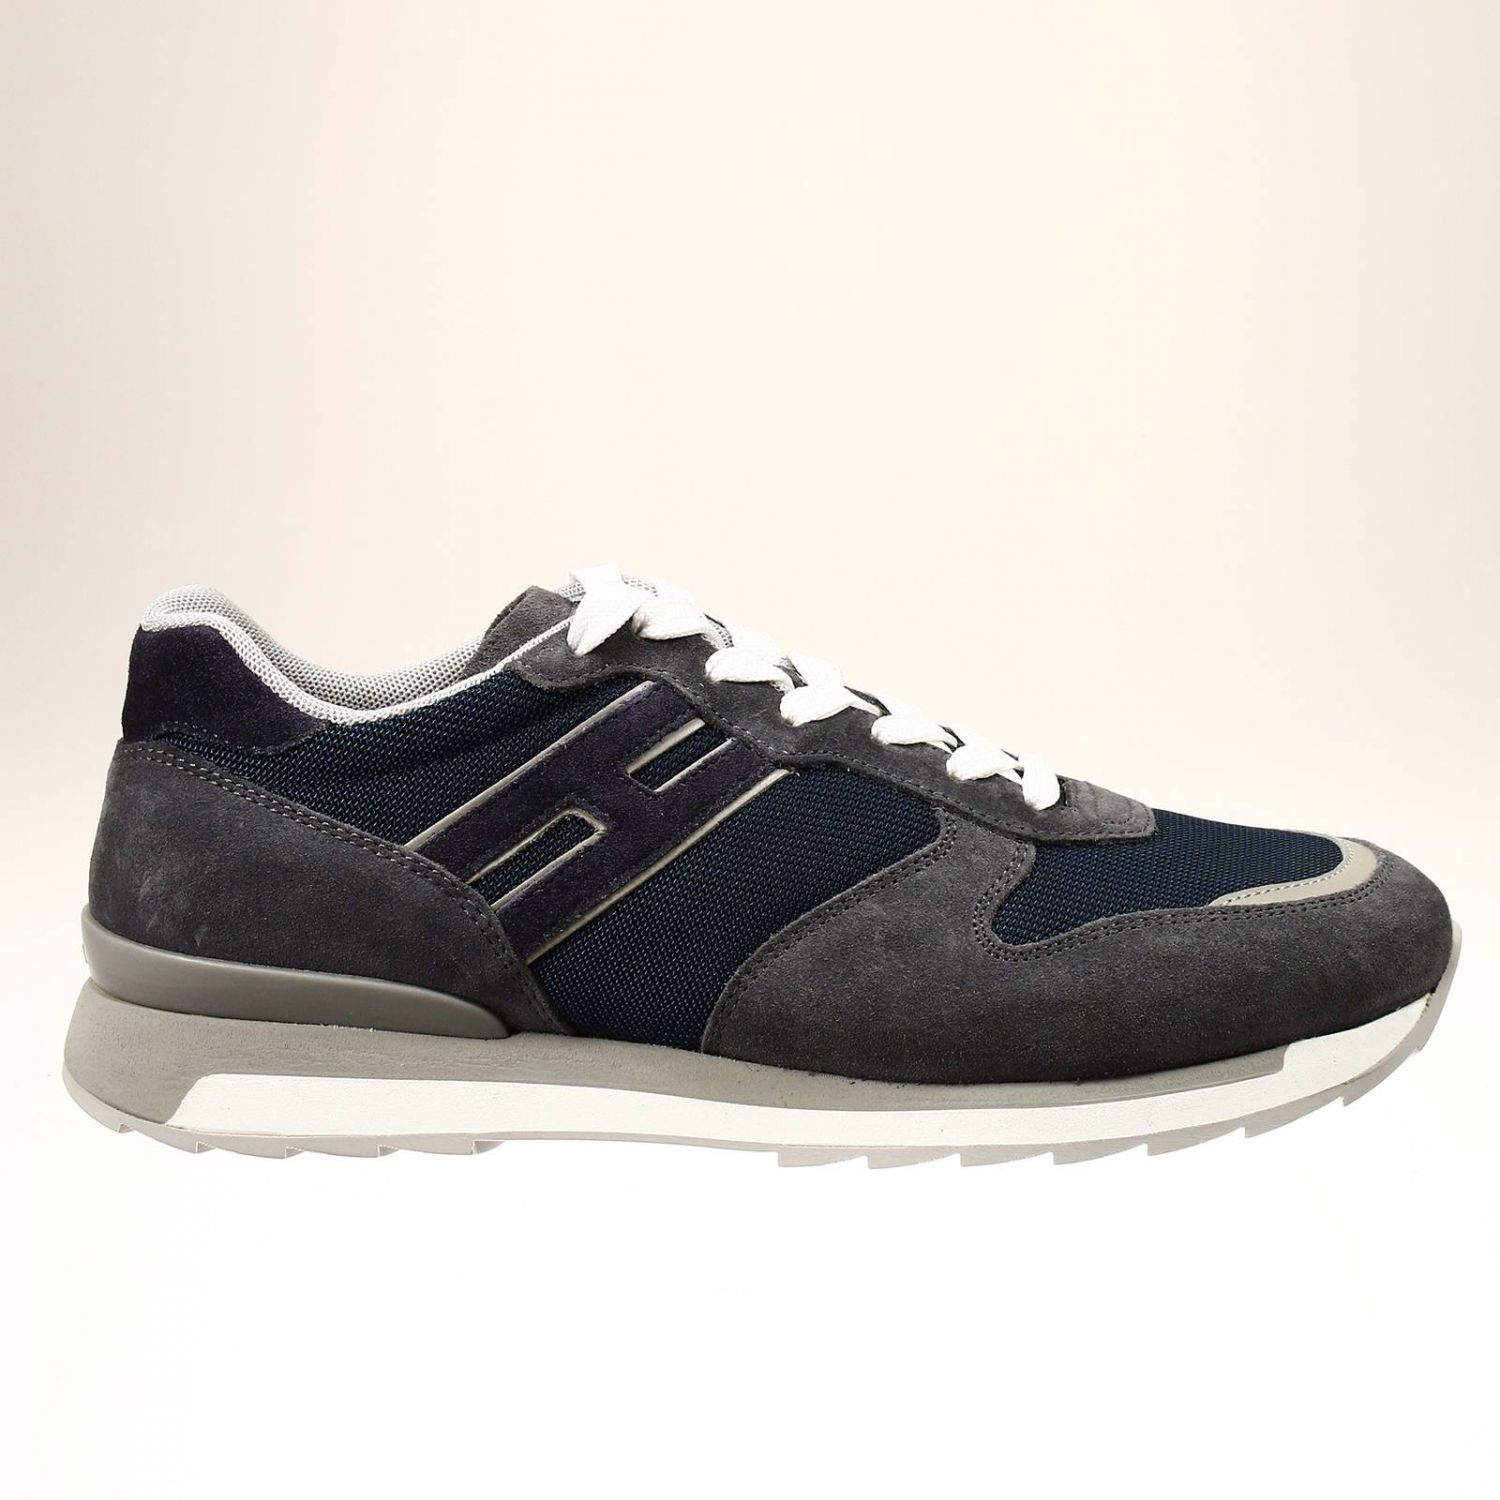 Lyst - Hogan Sneakers Rebel Suede E Nylon Running Shoes in Gray for Men